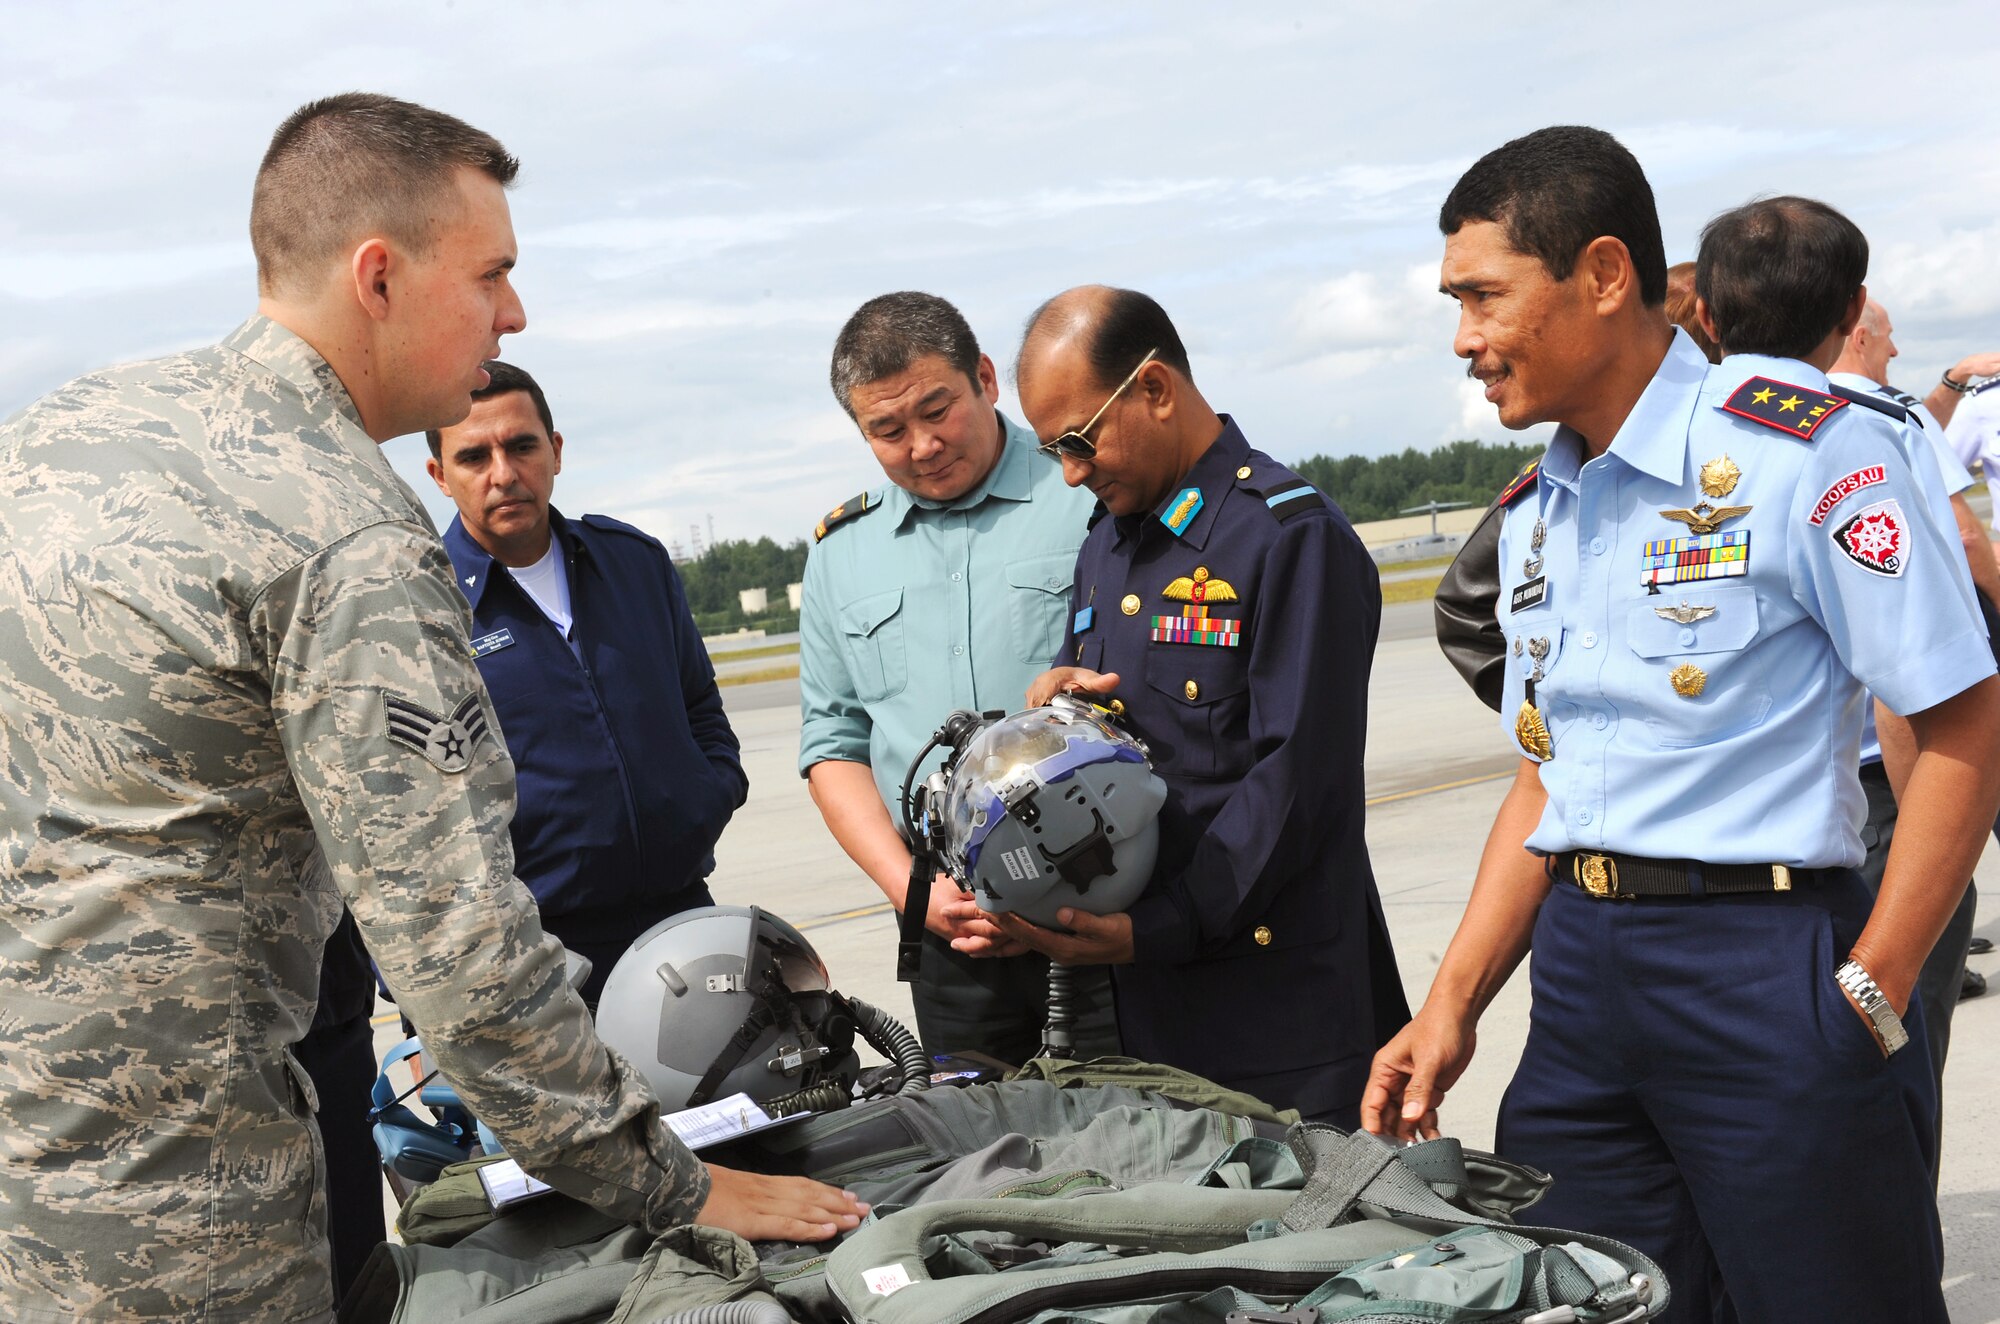 Senior Airman Shawn McCoy explains the different types of flight gear used in aircraft during the 2010 Executive Observer Program June 18, 2010, at Joint Base Elmendorf-Richardson, Alaska. Sixteen general officers from 16 different countries joined Pacific Air Forces leaders in their premier multinational large force employment exercise while building partnerships with senior airpower leaders from the global community. Airman McCoy is an aircrew flight equipment specialist with the 525th Fighter Squadron here. (U.S. Air Force photo/Senior Airman Cynthia Spalding)